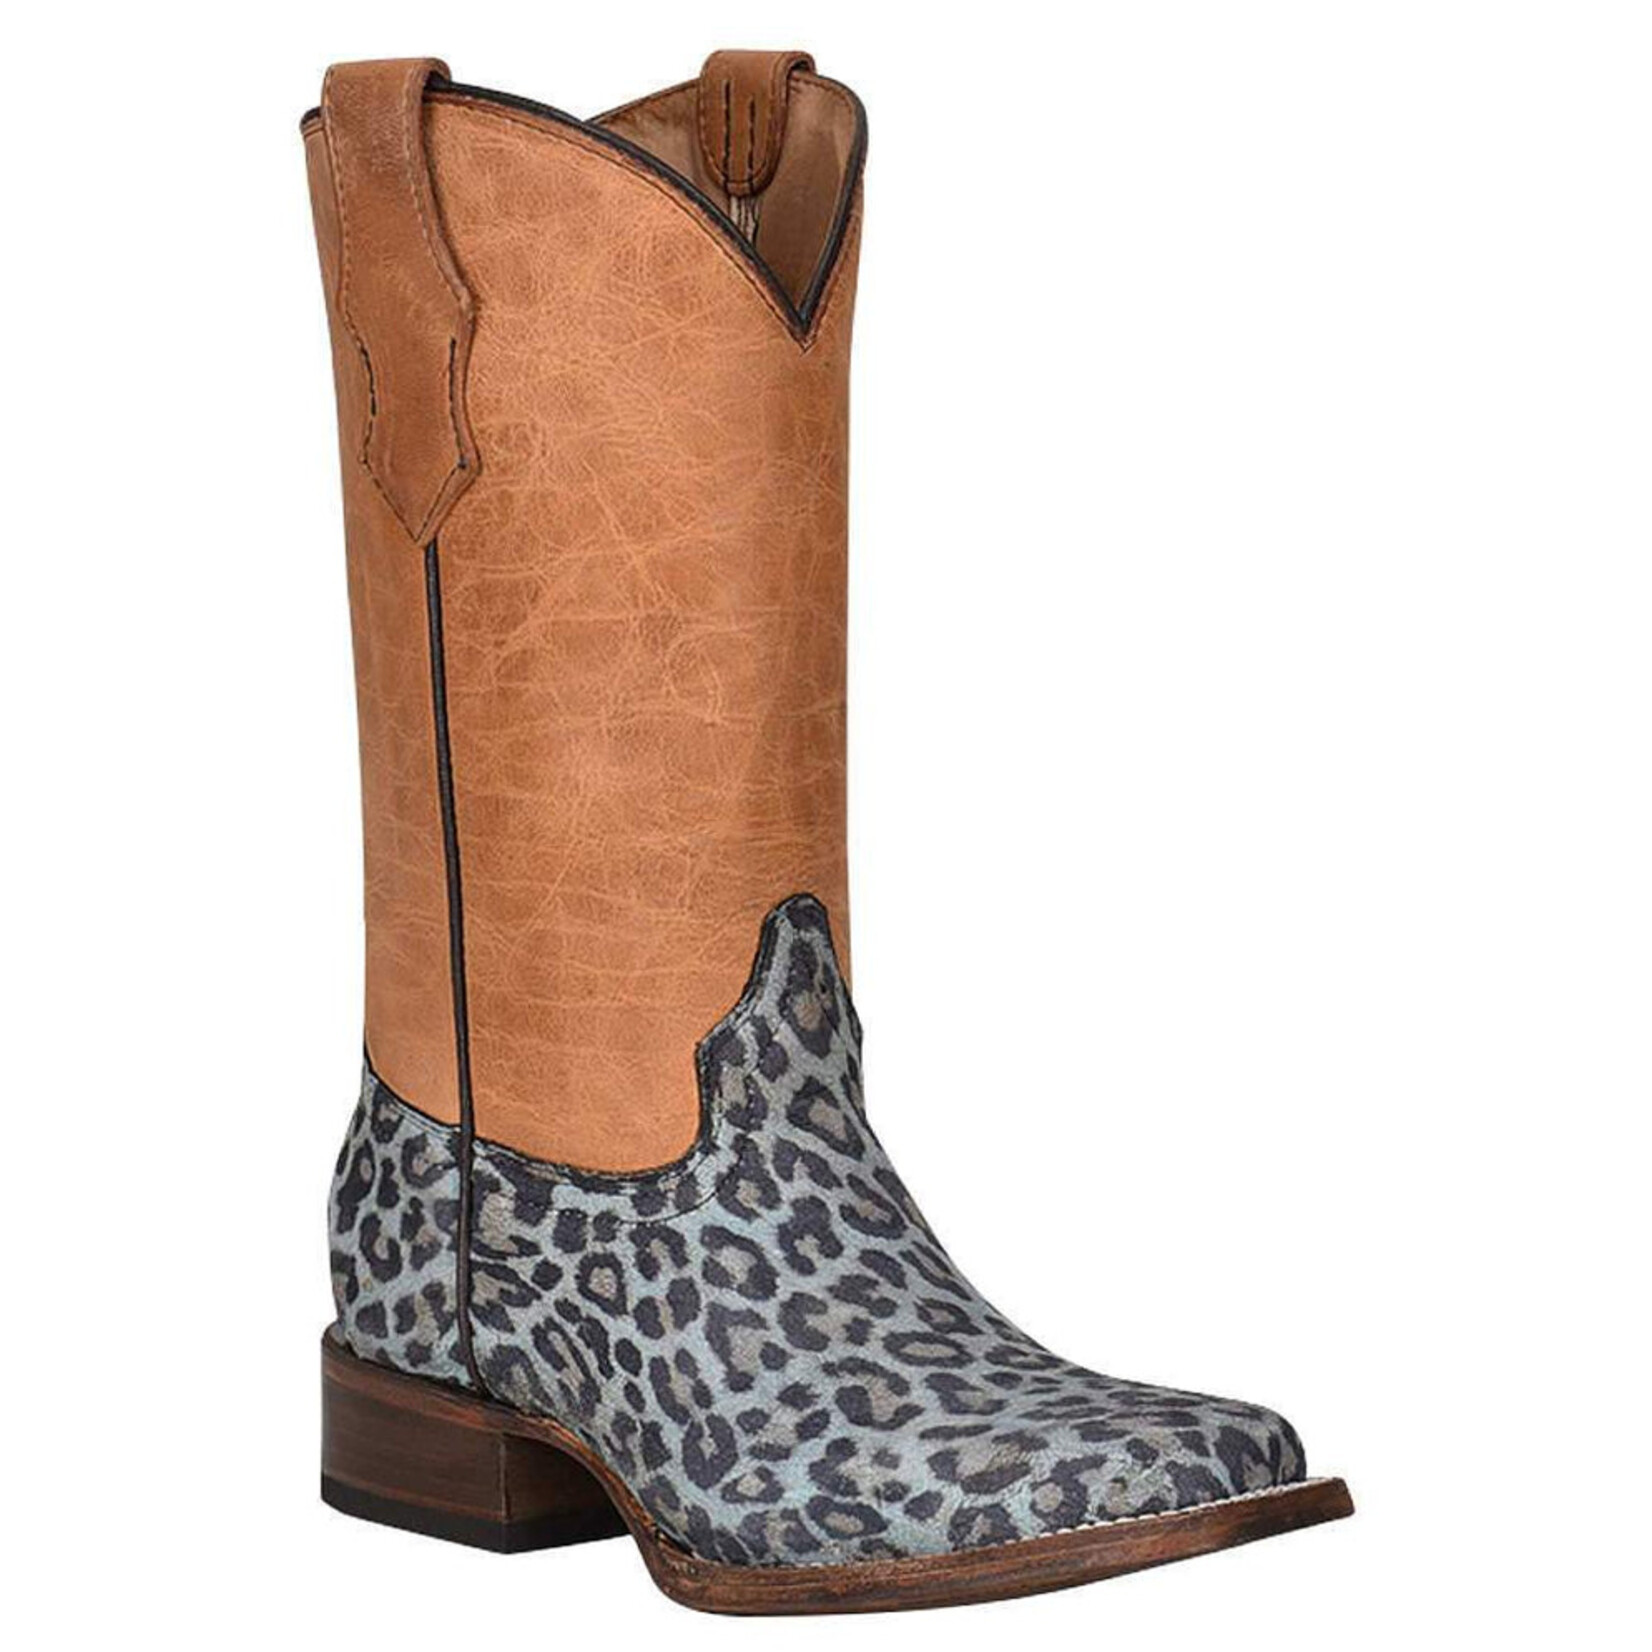 Corral Boots Corral Boots Teen Leopard Print